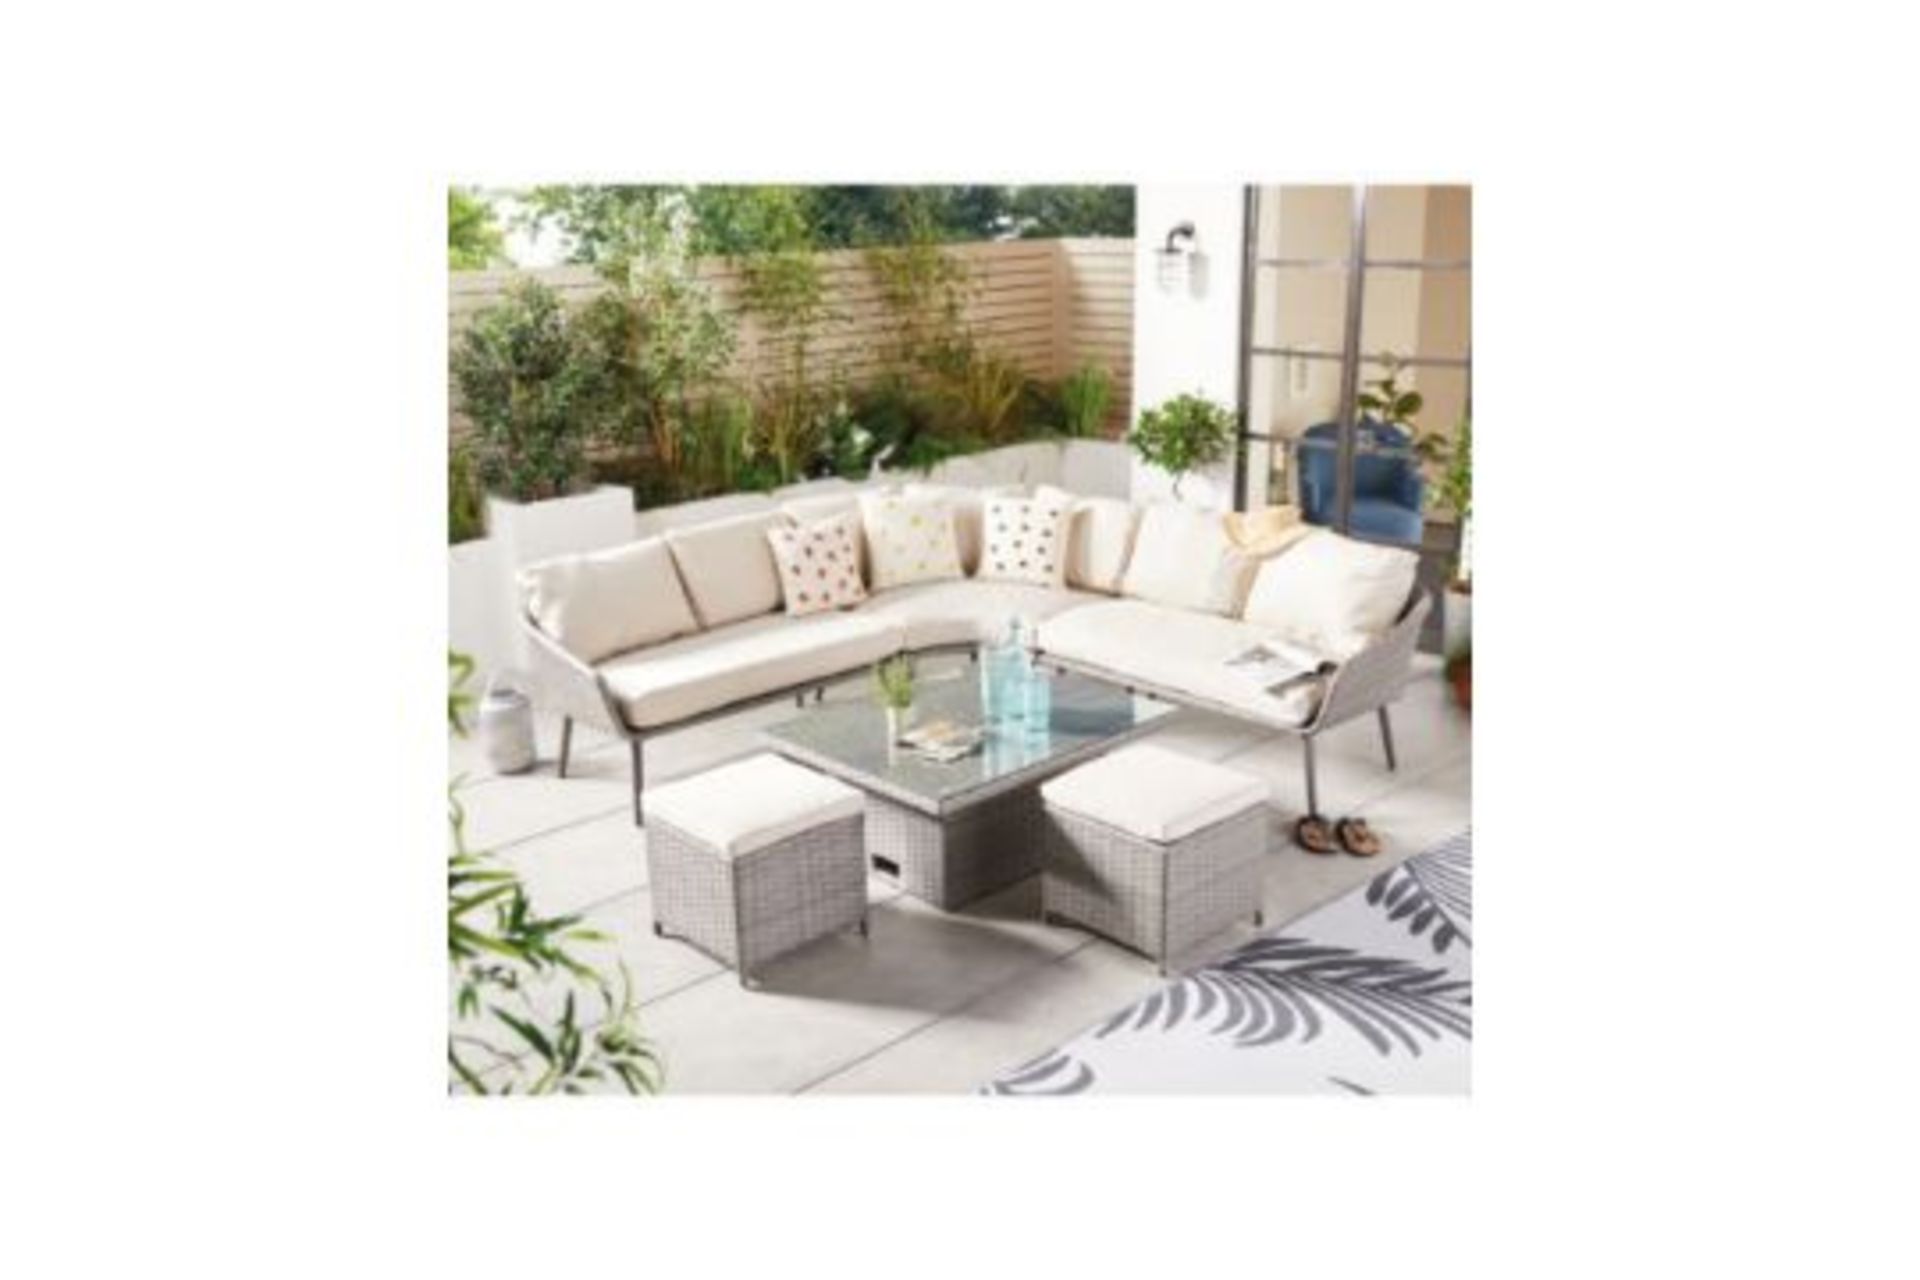 Multifunctional Lounge & Dining Corner Sofa Dining Set. Enjoy the warmer weather with this Luxury